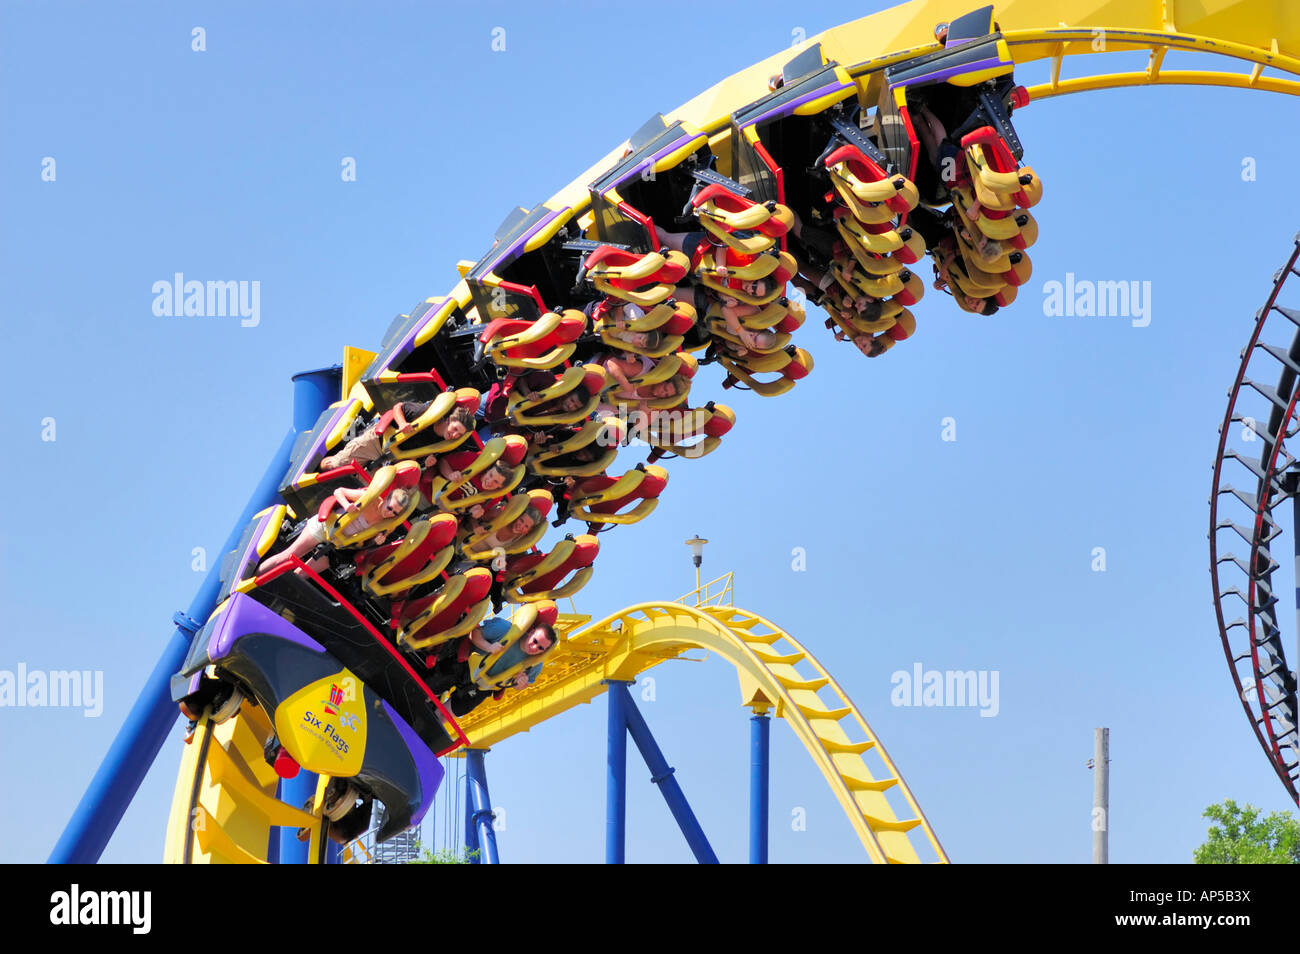 The stand up roller coaster named Chang at the Six Flags Kentucky Kingdom  amusement park in Louisville Kentucky USA Stock Photo - Alamy